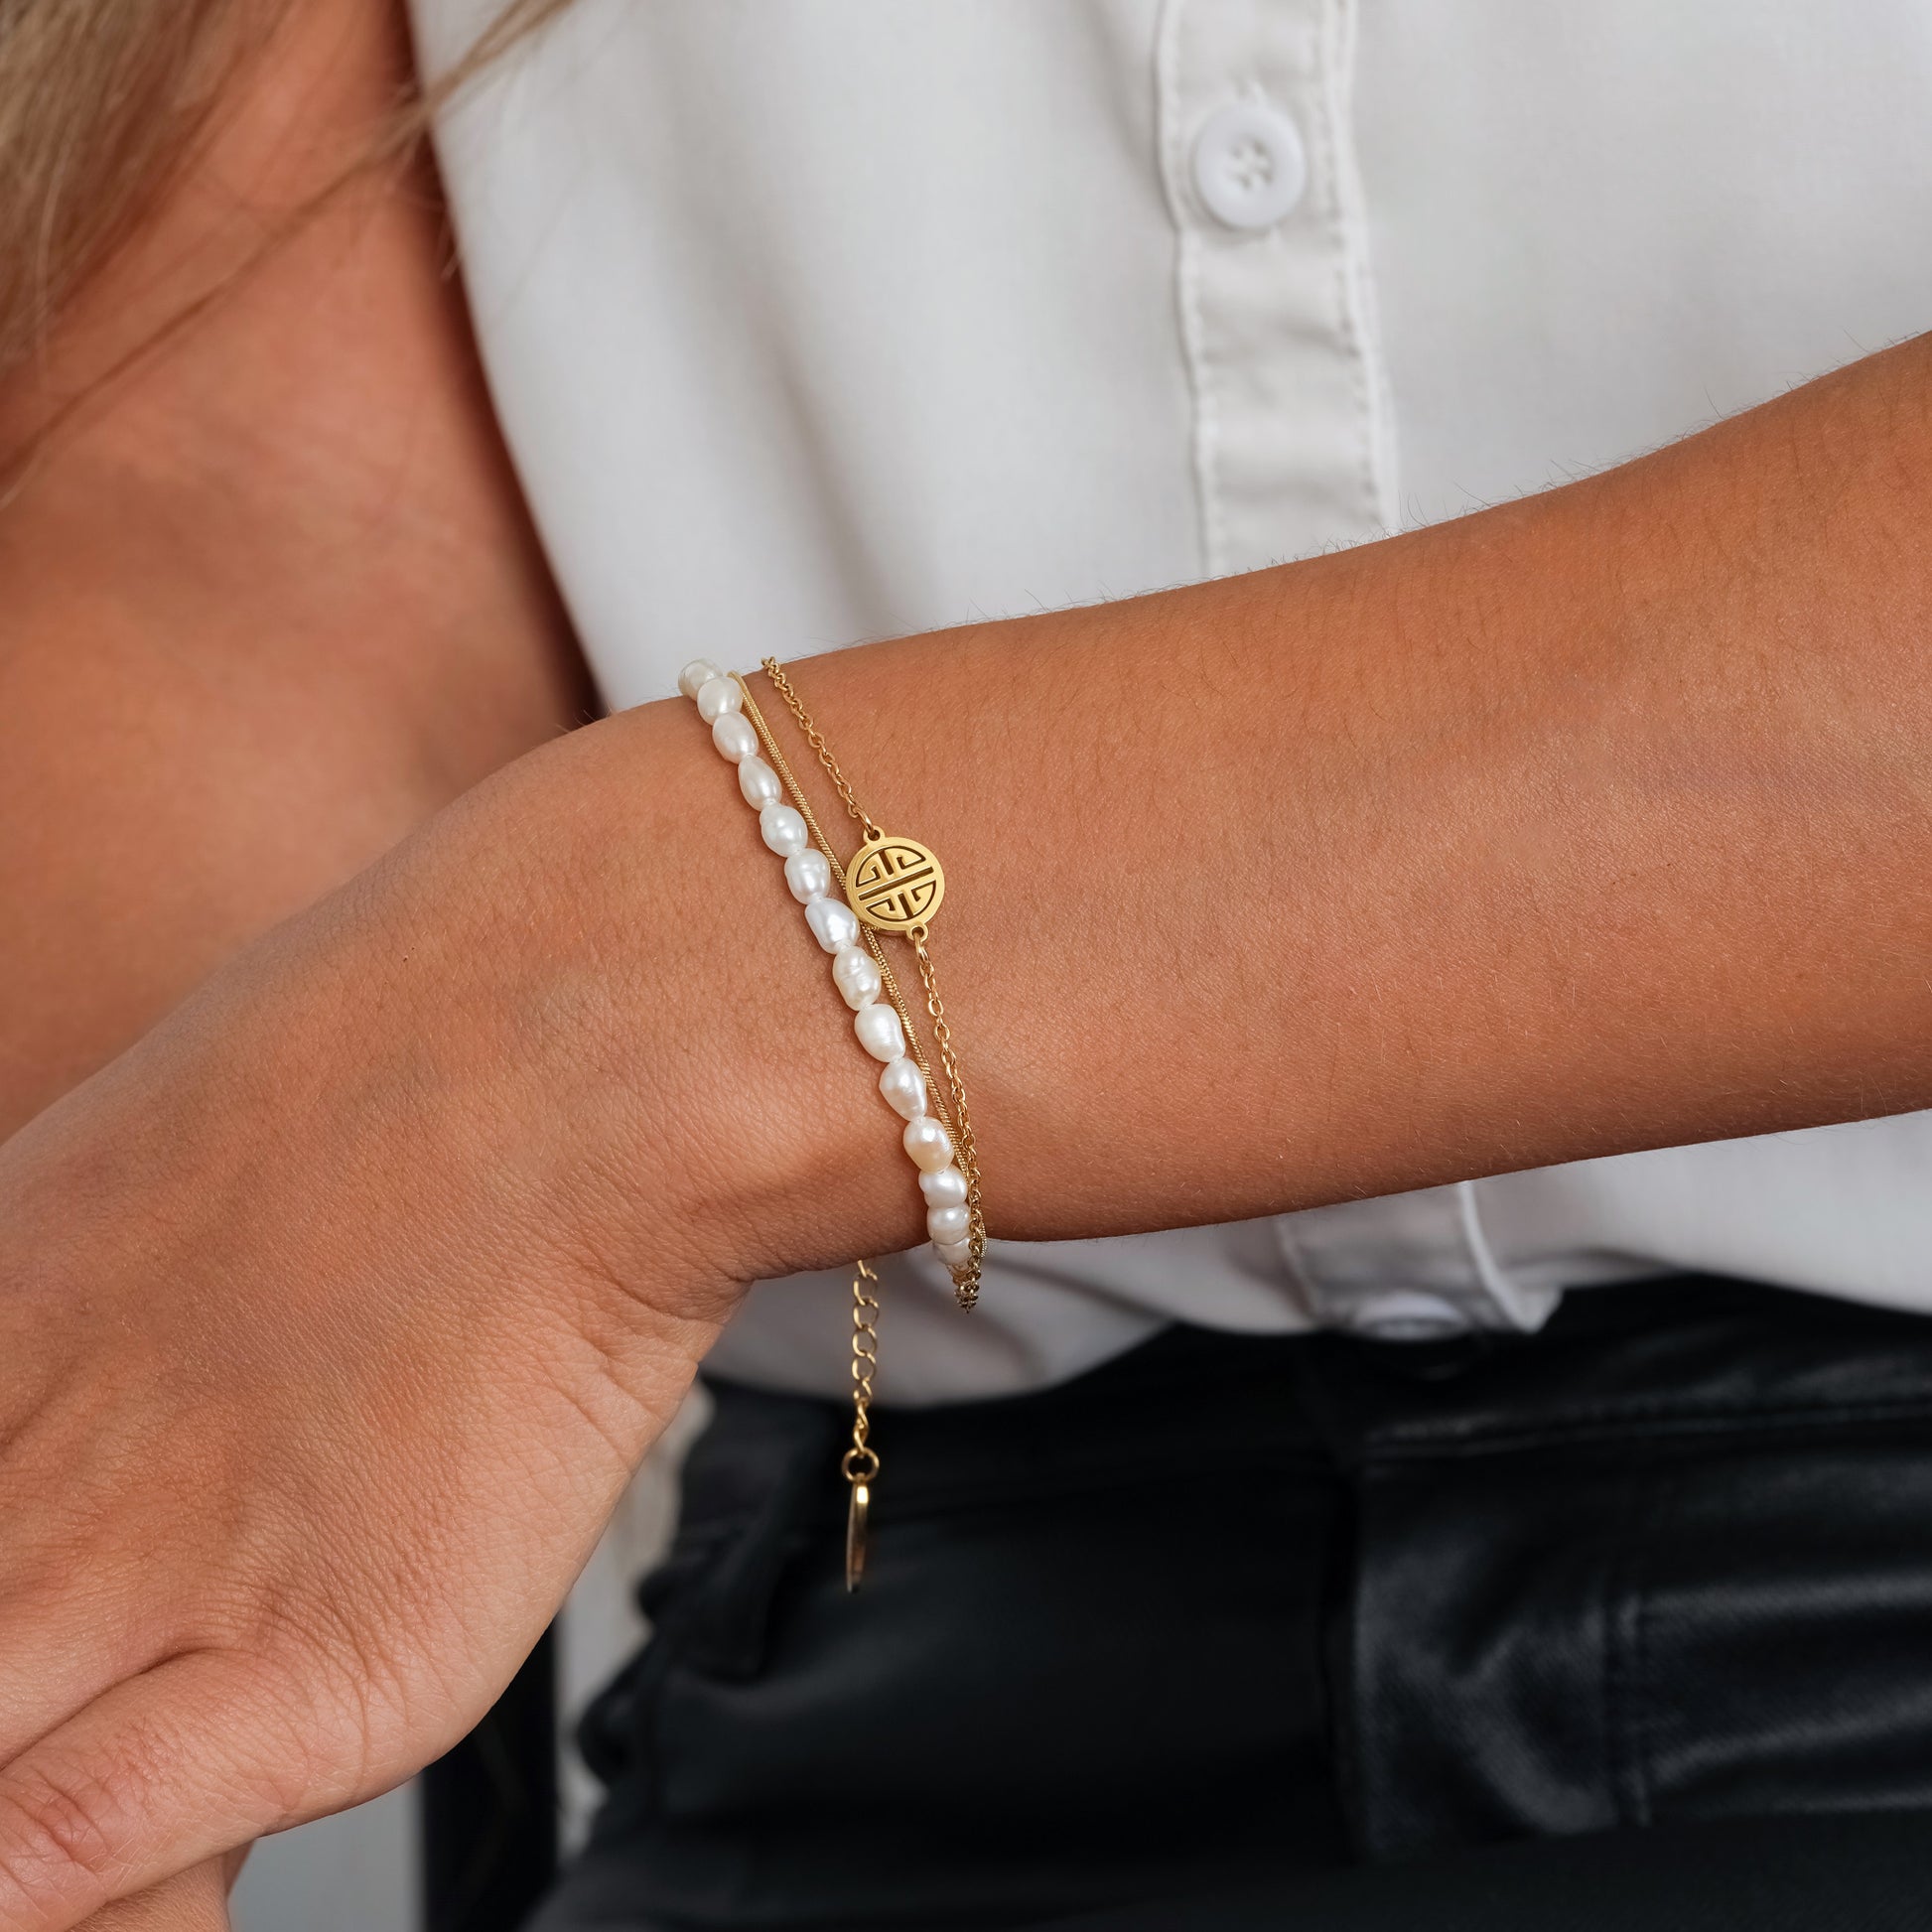 A model in a white sleeveless top wearing Lucky Pendant Pearl bracelet on her wrist. Close-up image of the bracelet.